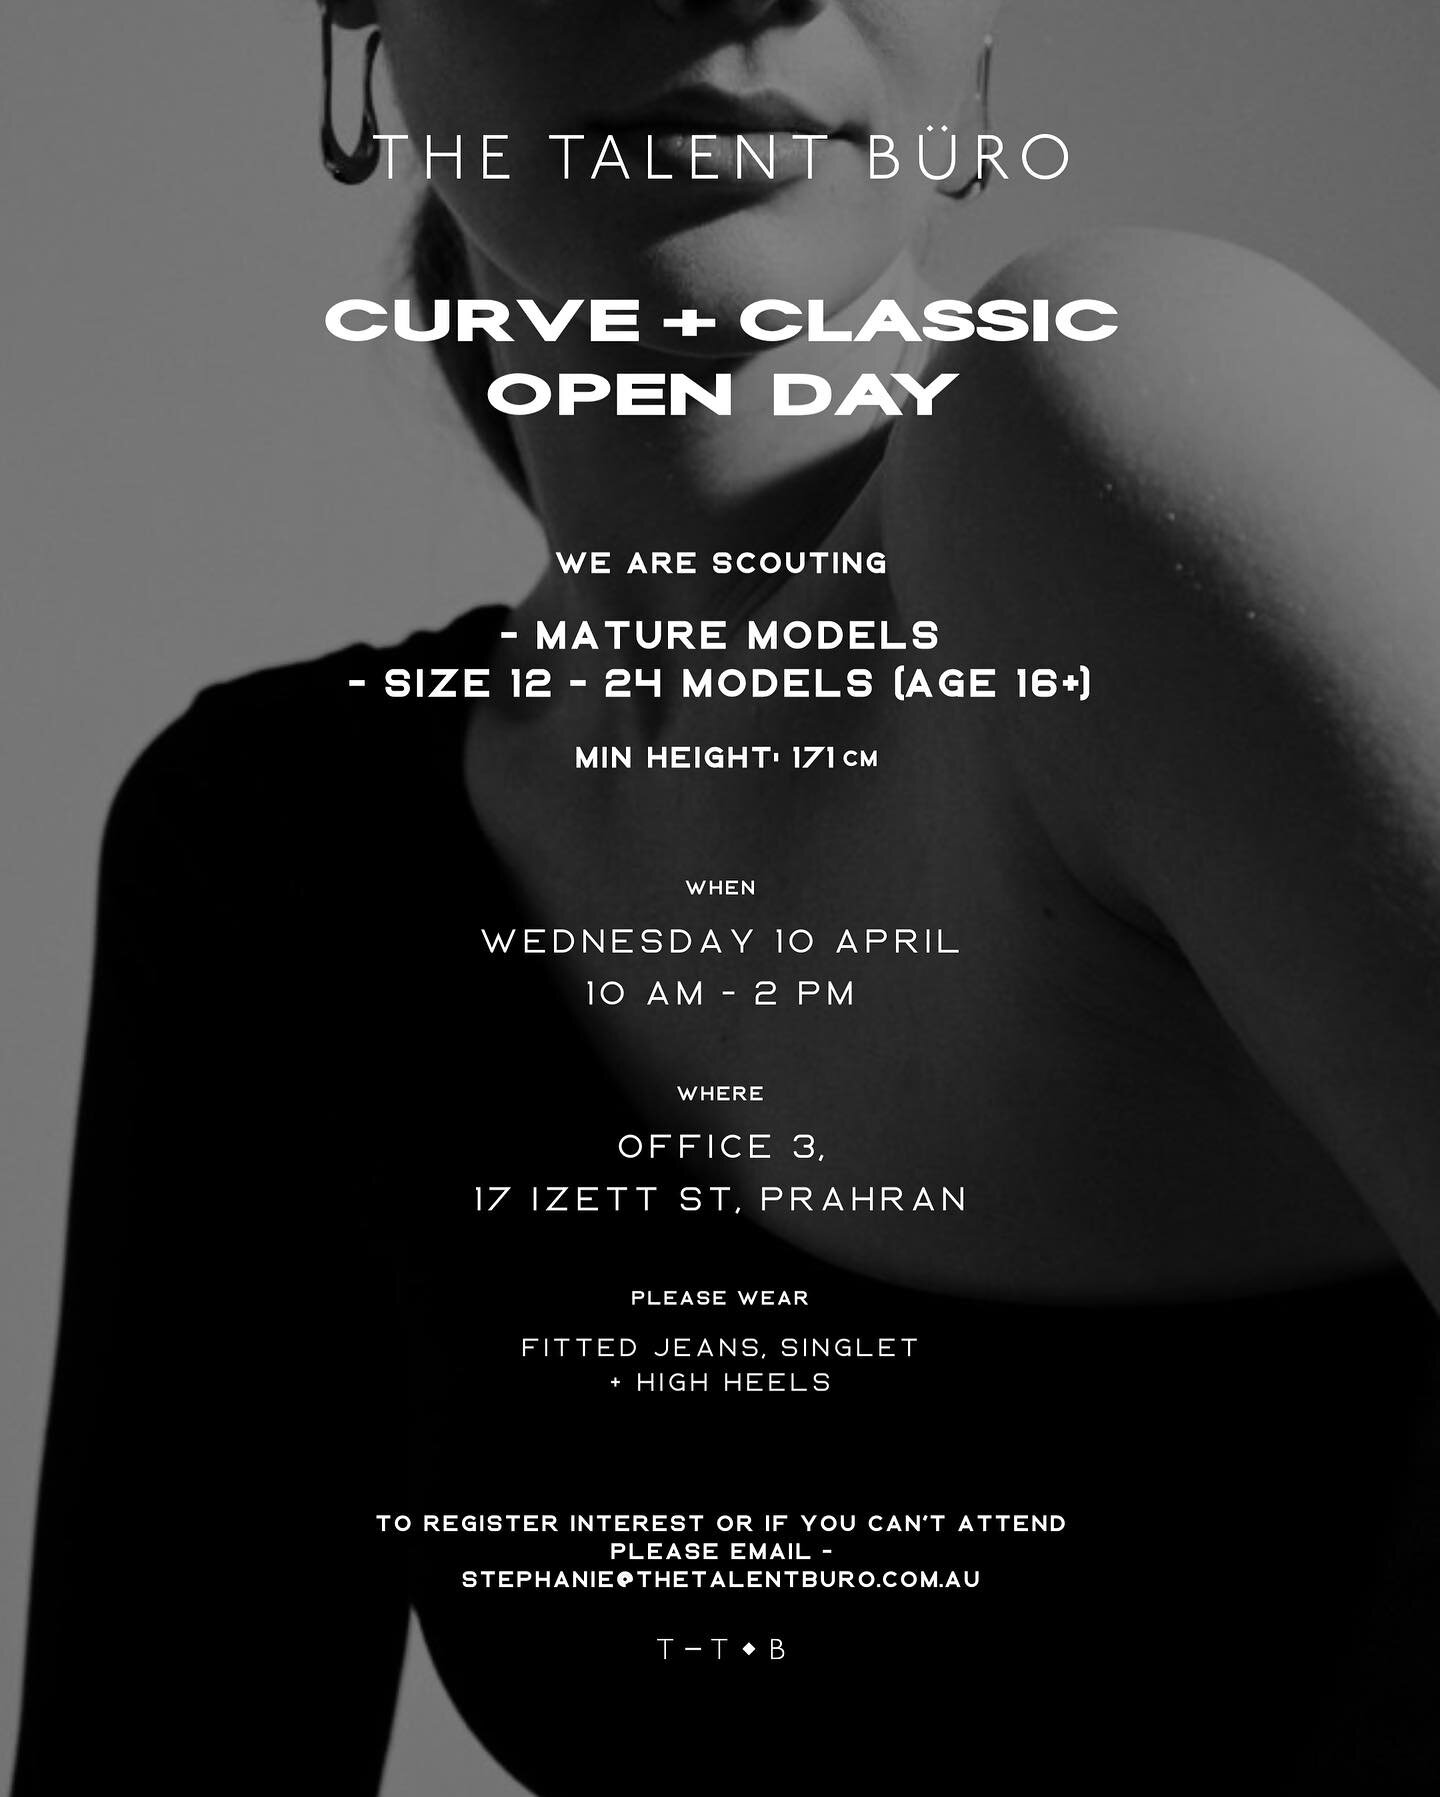 The Talent B&uuml;ro
CURVE + CLASSIC OPEN DAY

We are scouting &mdash;
- Mature models
- Size 12 - 24 models (age 16+)
Min height 173cm.

All levels of experience welcome.

WHEN &mdash;
Wednesday 10 April
10 AM - 2 PM

WHERE &mdash;
Office 3, 17 Izet